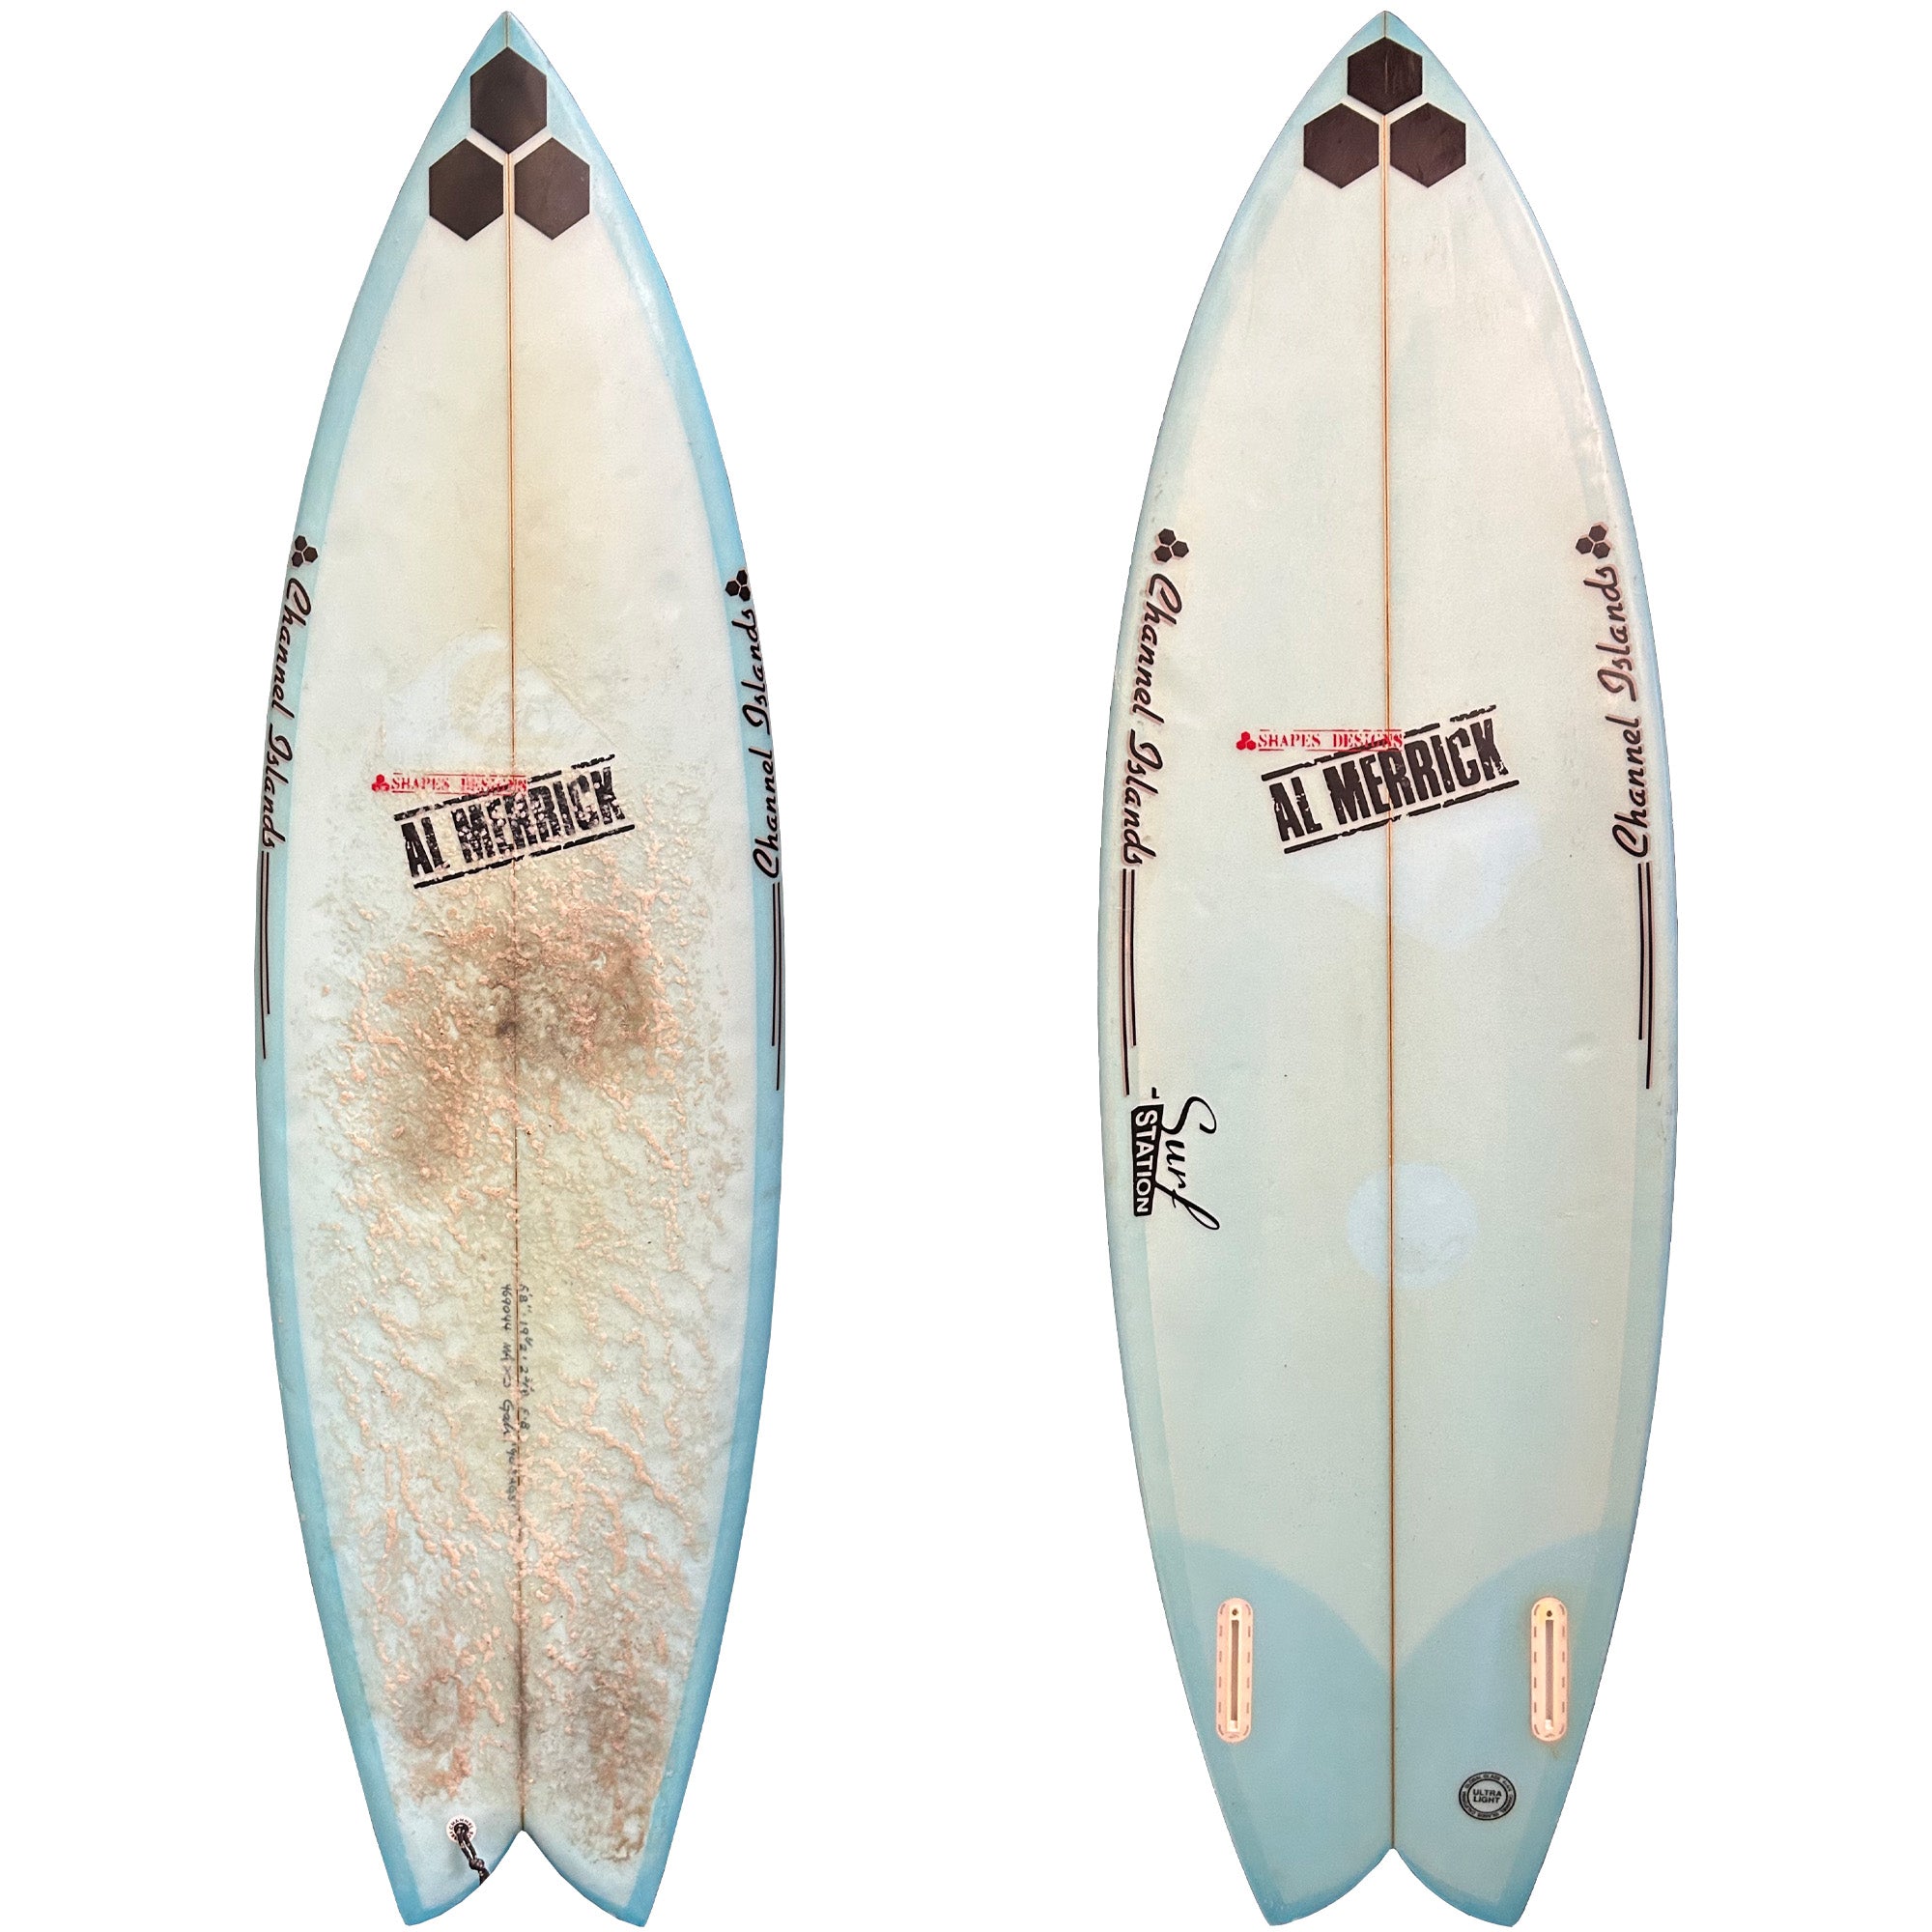 Channel Islands Fish 5'8 Used Surfboard